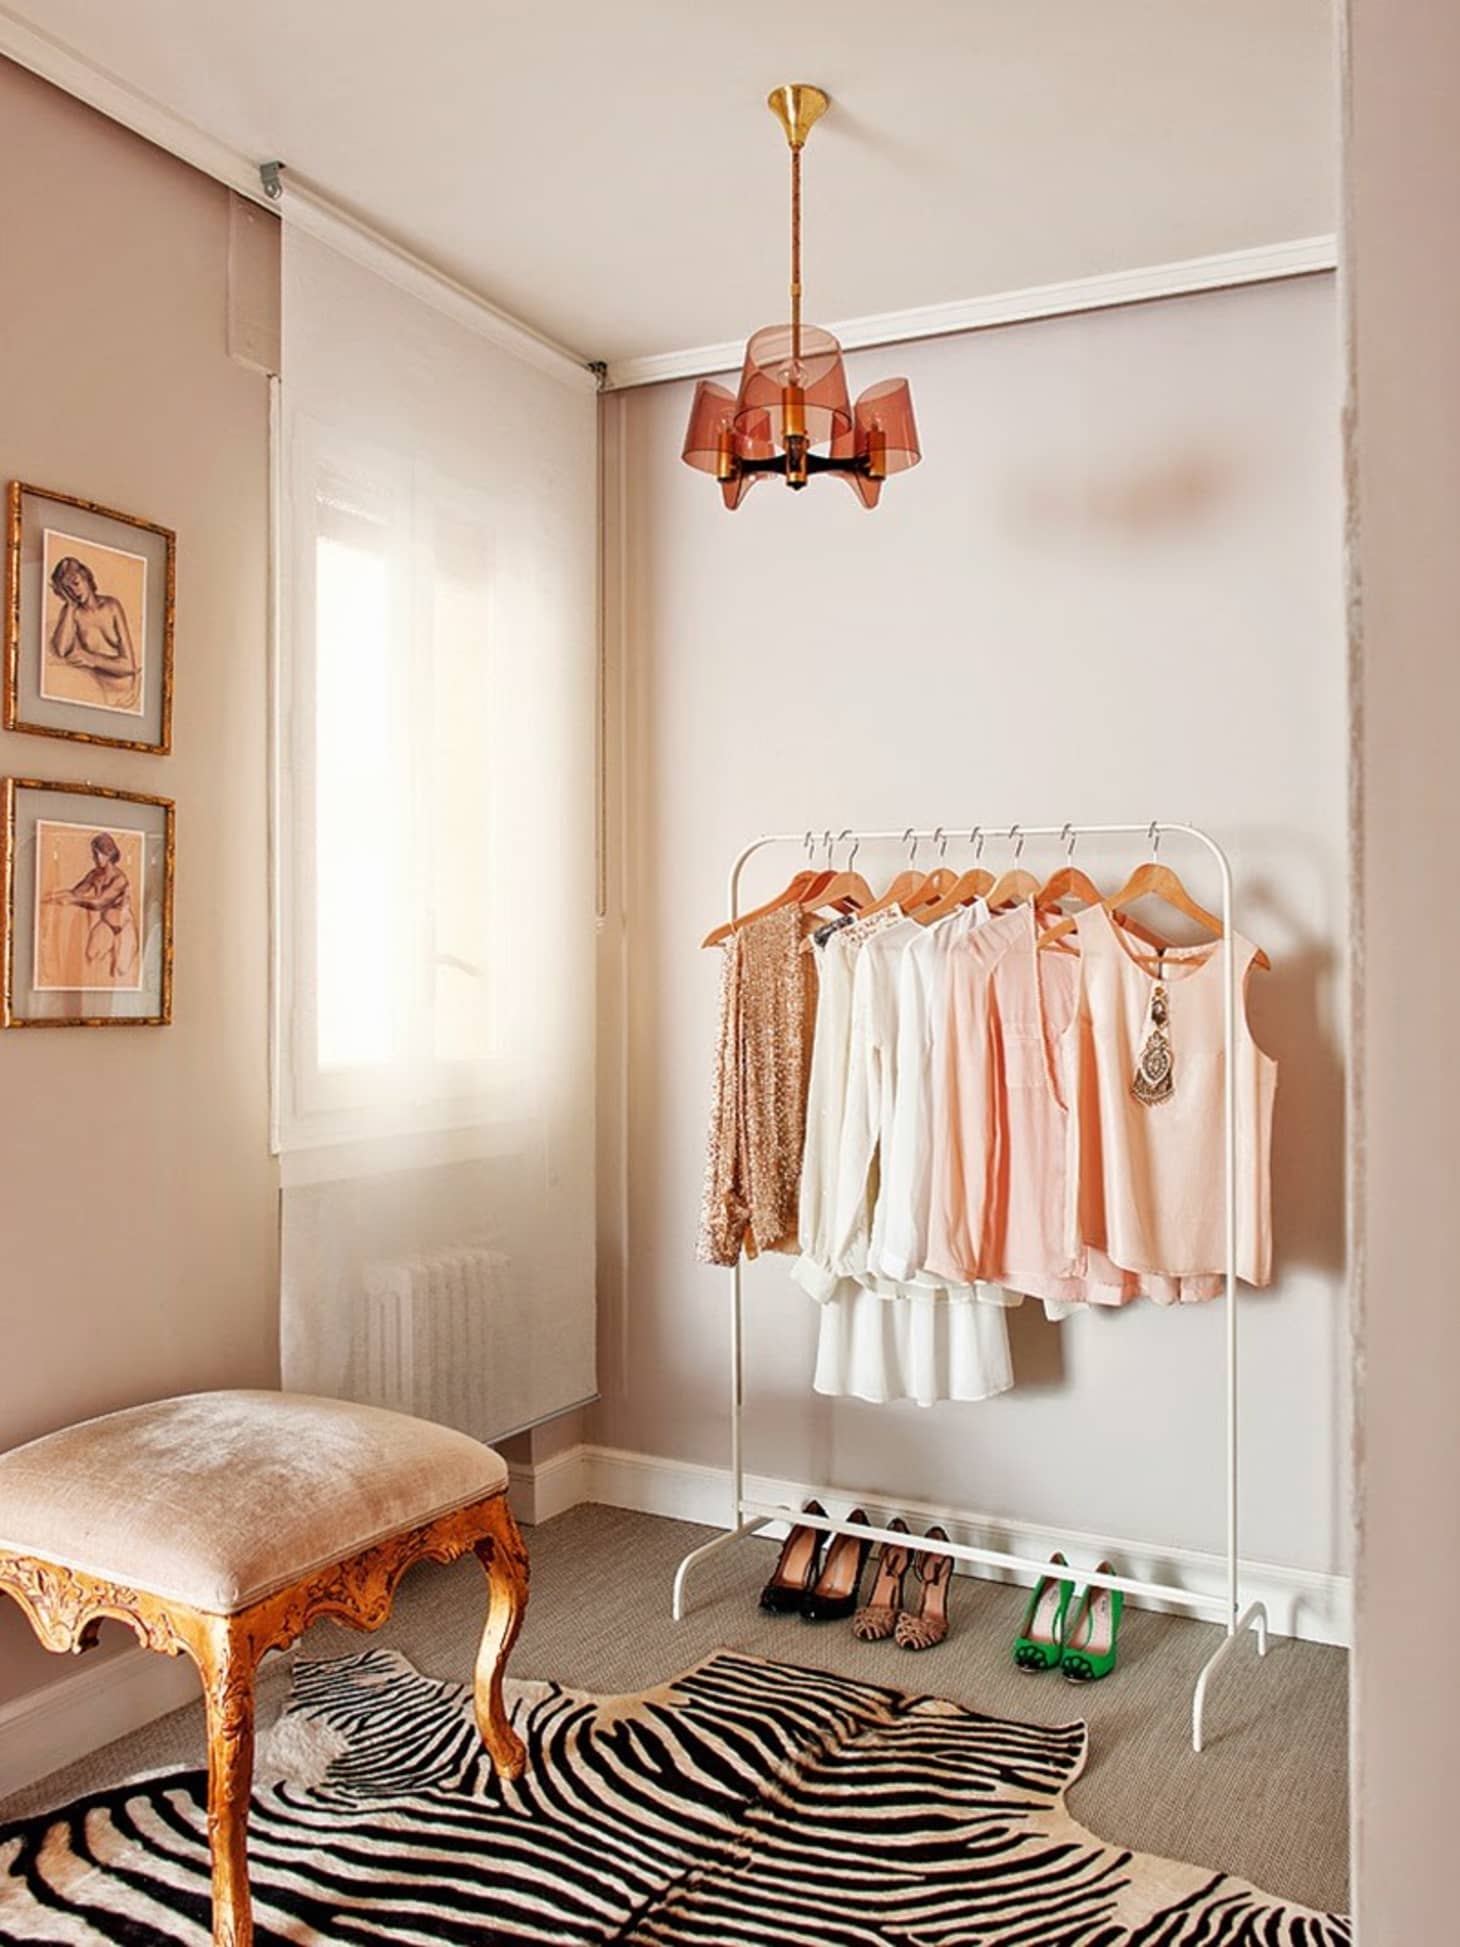 13 Bedrooms Turned Into The Dreamiest Of Dream Closets Apartment Therapy